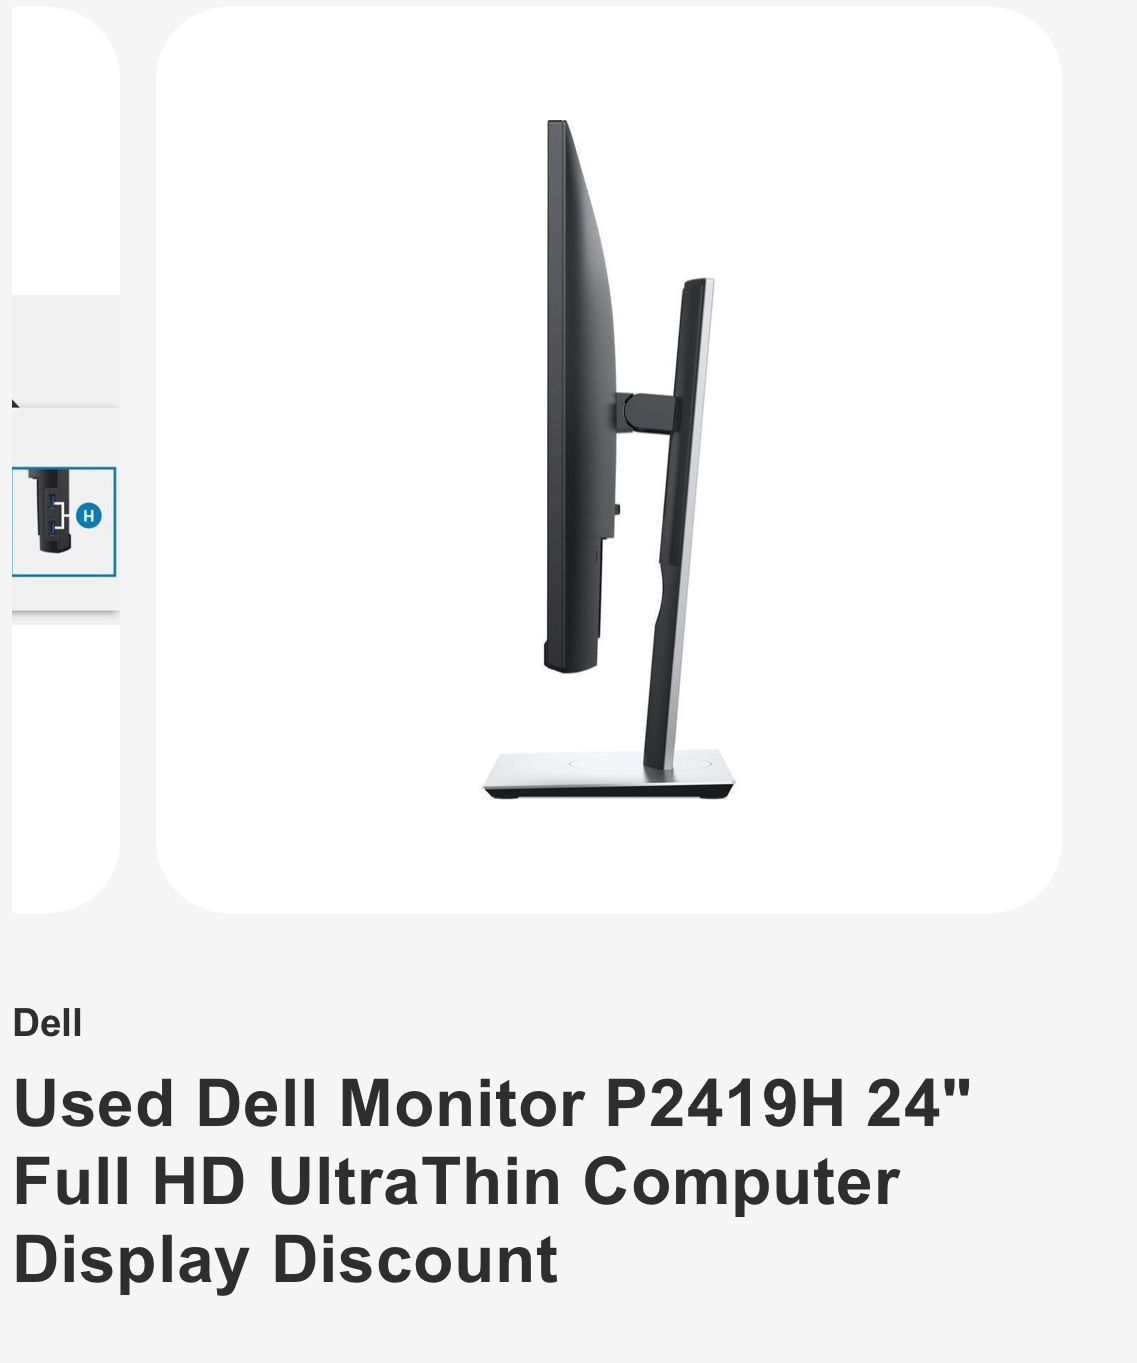 Dell Used Dell Monitor P2419H 24" Full HD UltraThin Computer Display Discount